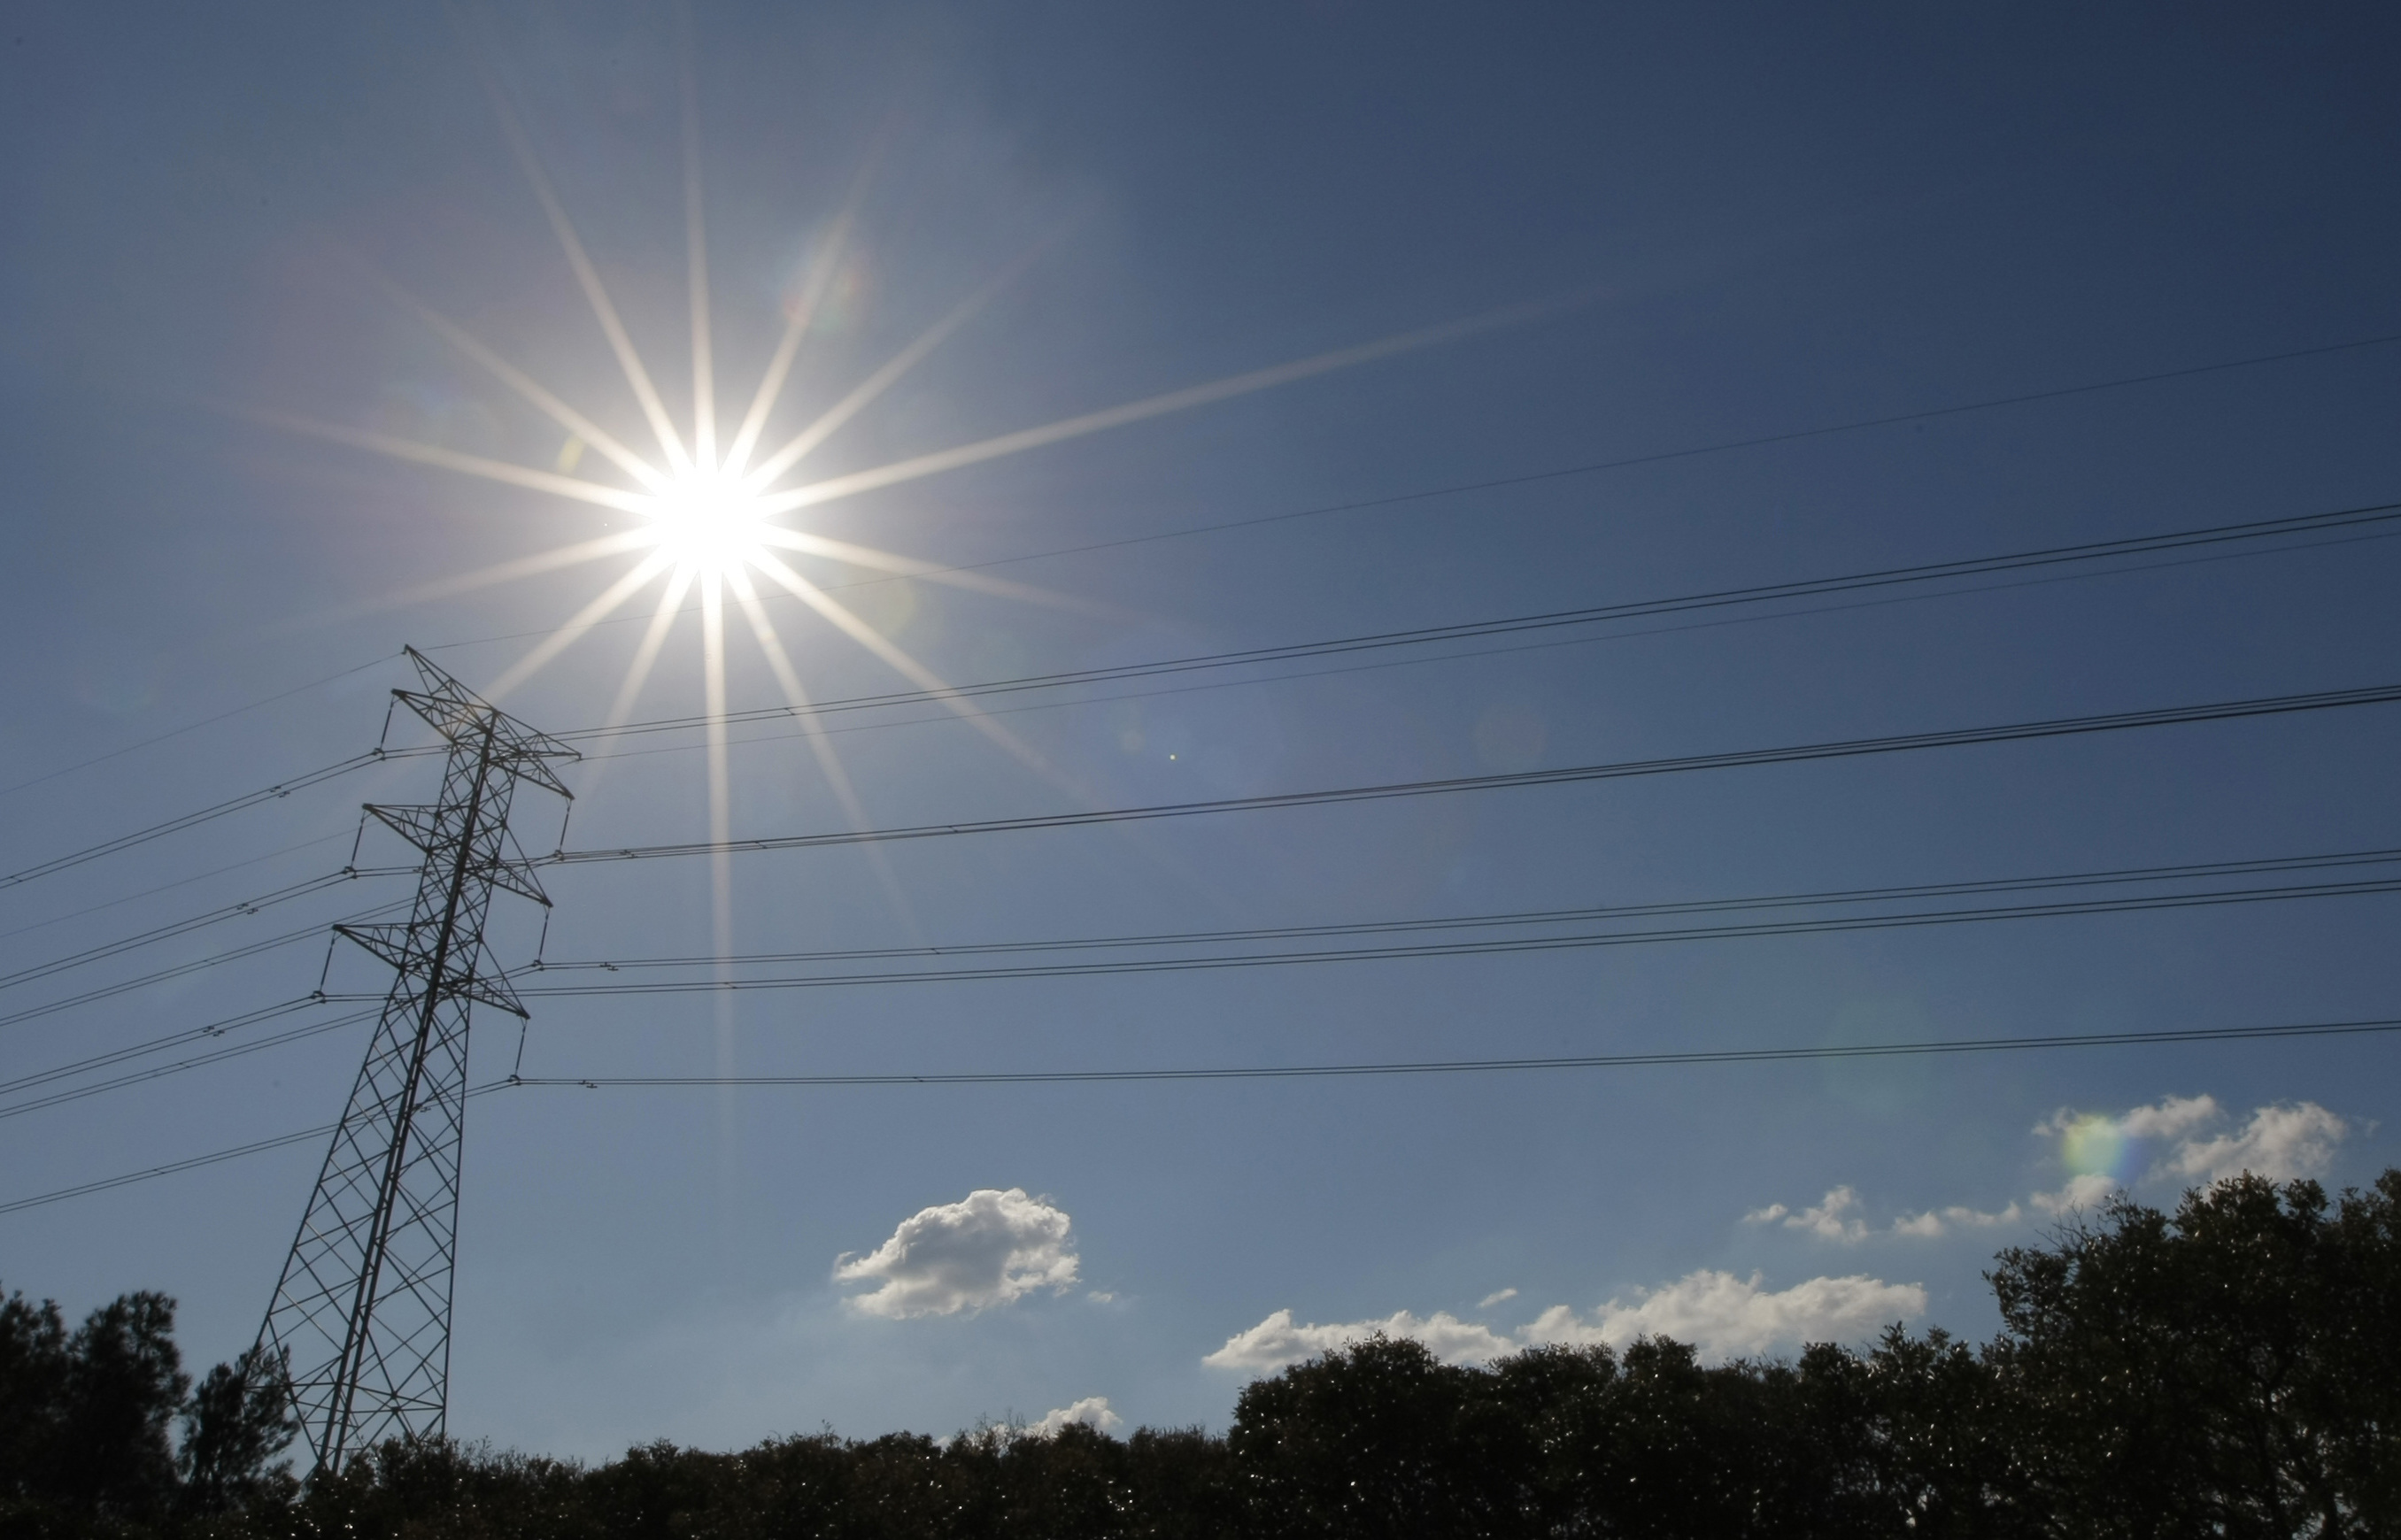 Sun shines over a high tension power line in an industrial area of Sydney